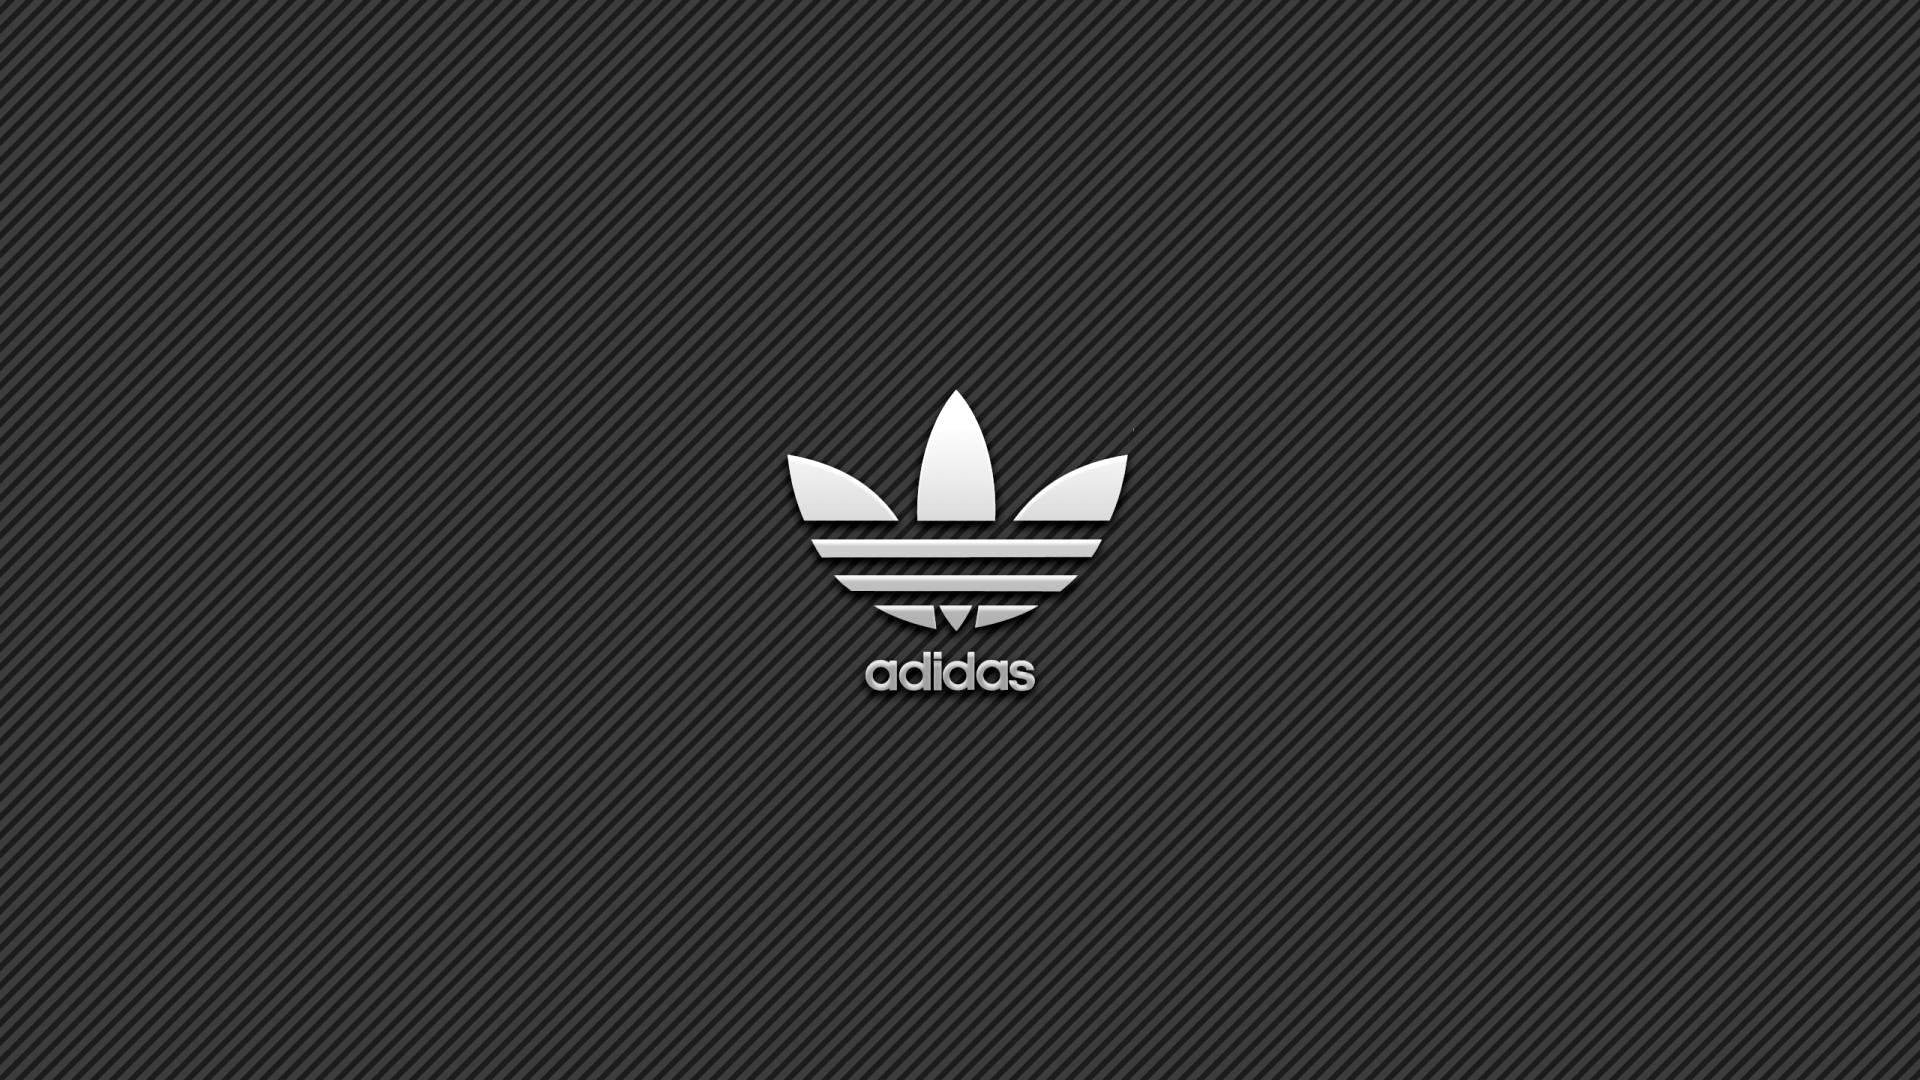 adidas, products